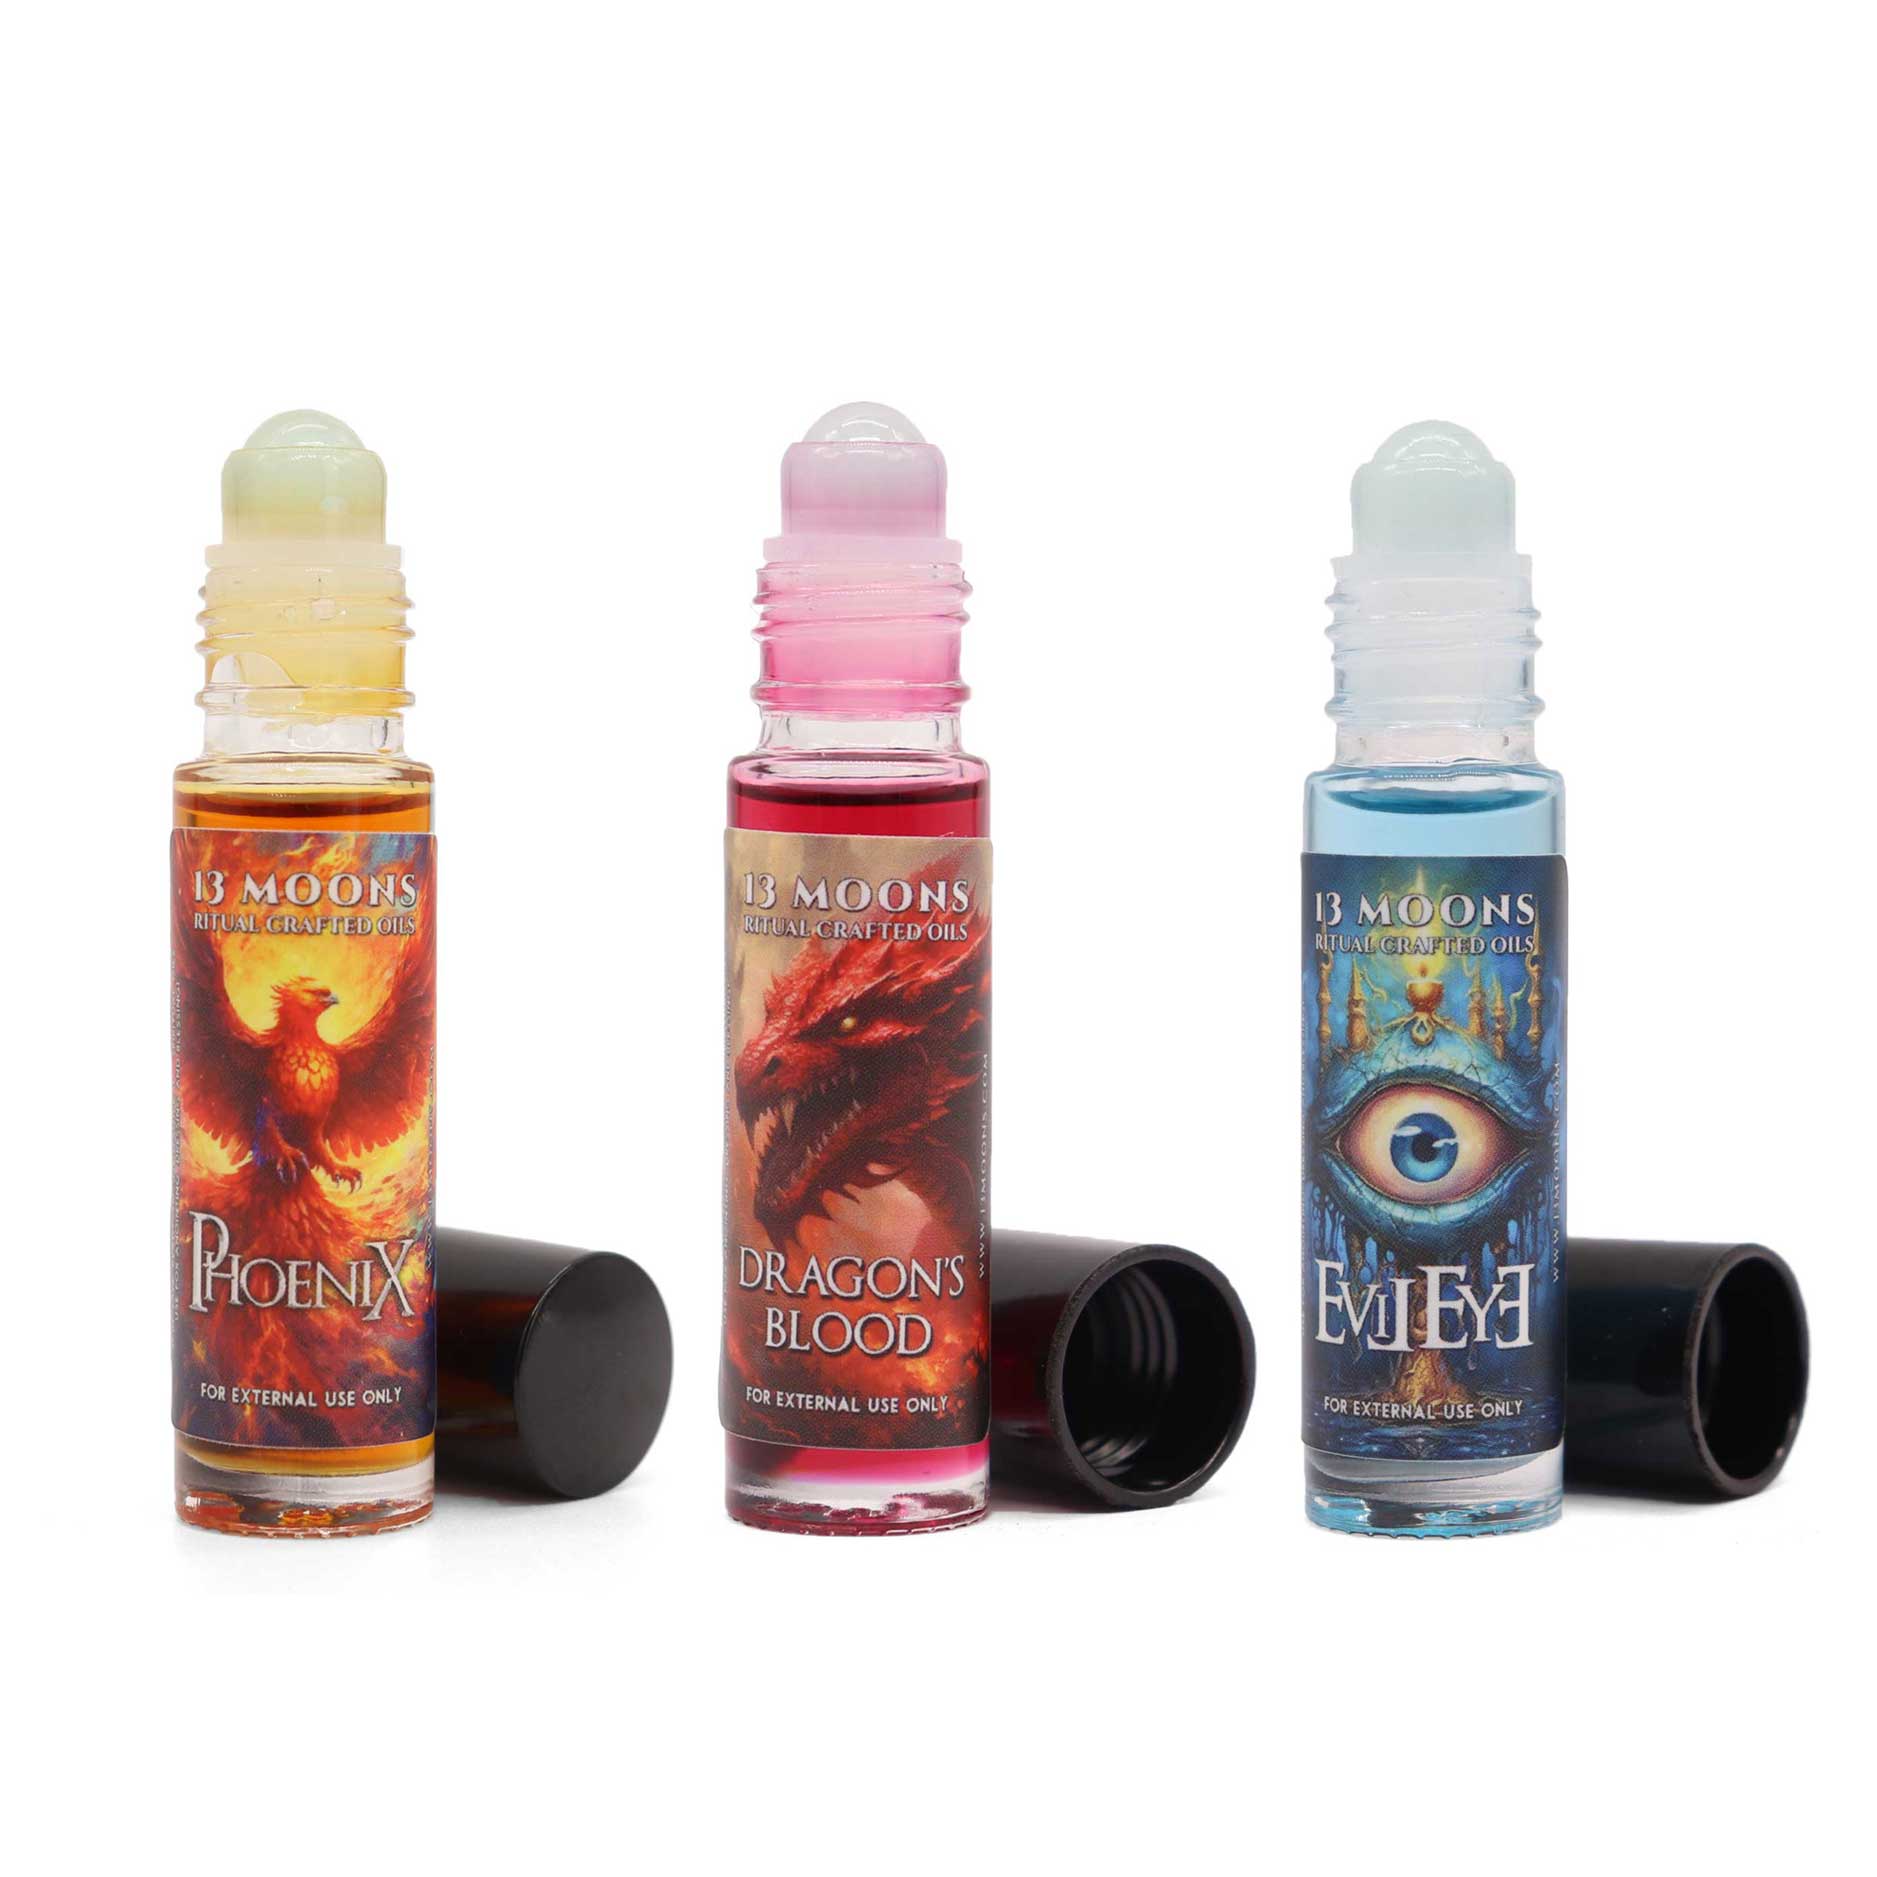 Power of 3 Ritual Crafted Oil Set - 13 Moons